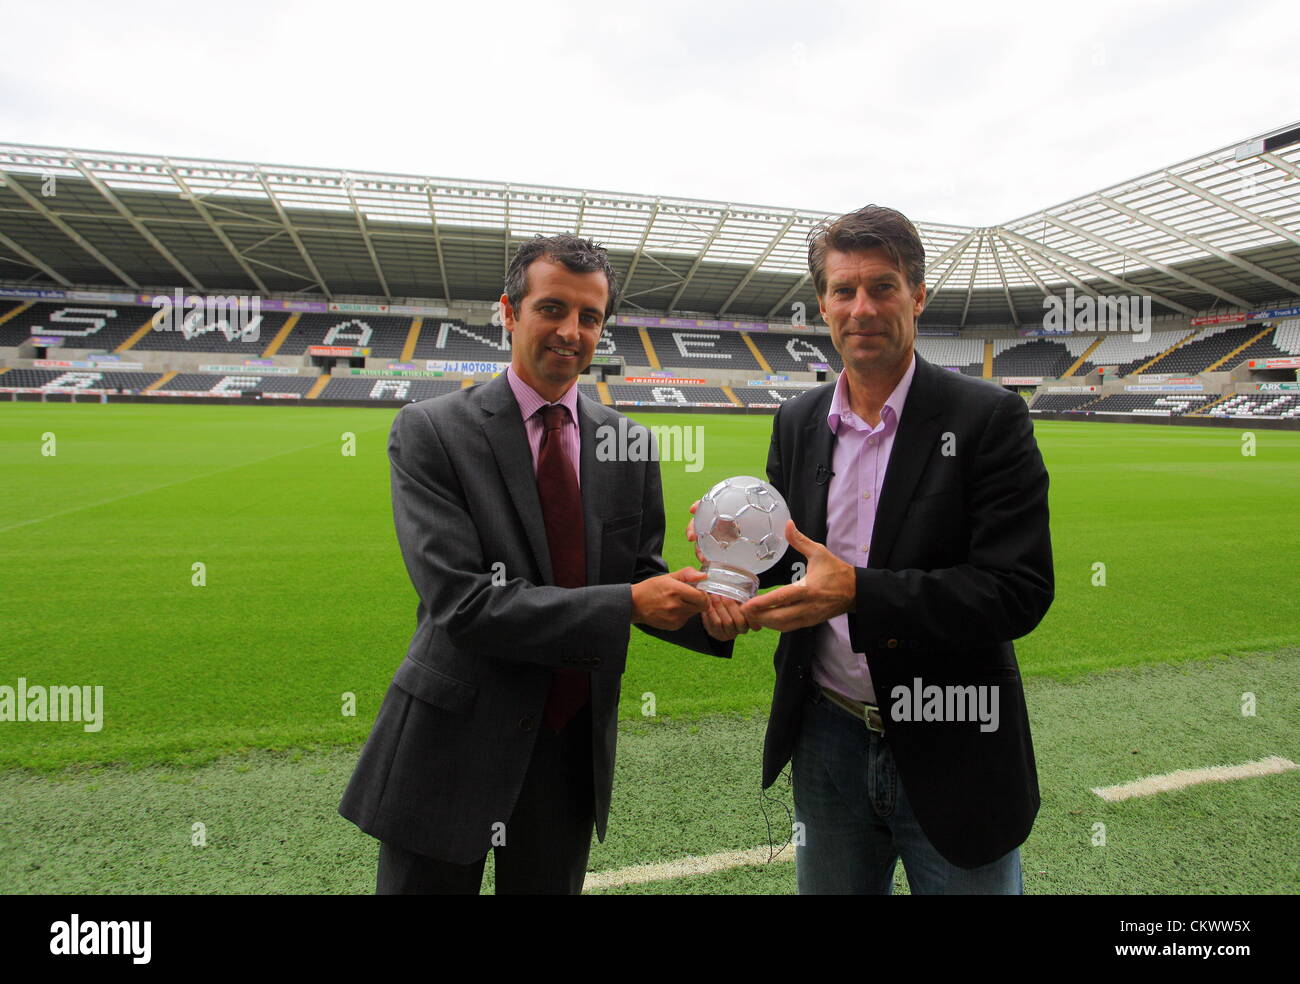 Pictured L-R: Sky Sports presenter John Phillips presenting the F&C Investments League Managers Association  (LMA)performance of the week award to manager Michael Laudrup, for his team's performance against Queens Park Rangers. Thursday 23 August 2012  Re: Barclay's Premier League side Swansea City FC press conference at the Liberty Stadium, south Wales, UK. Stock Photo